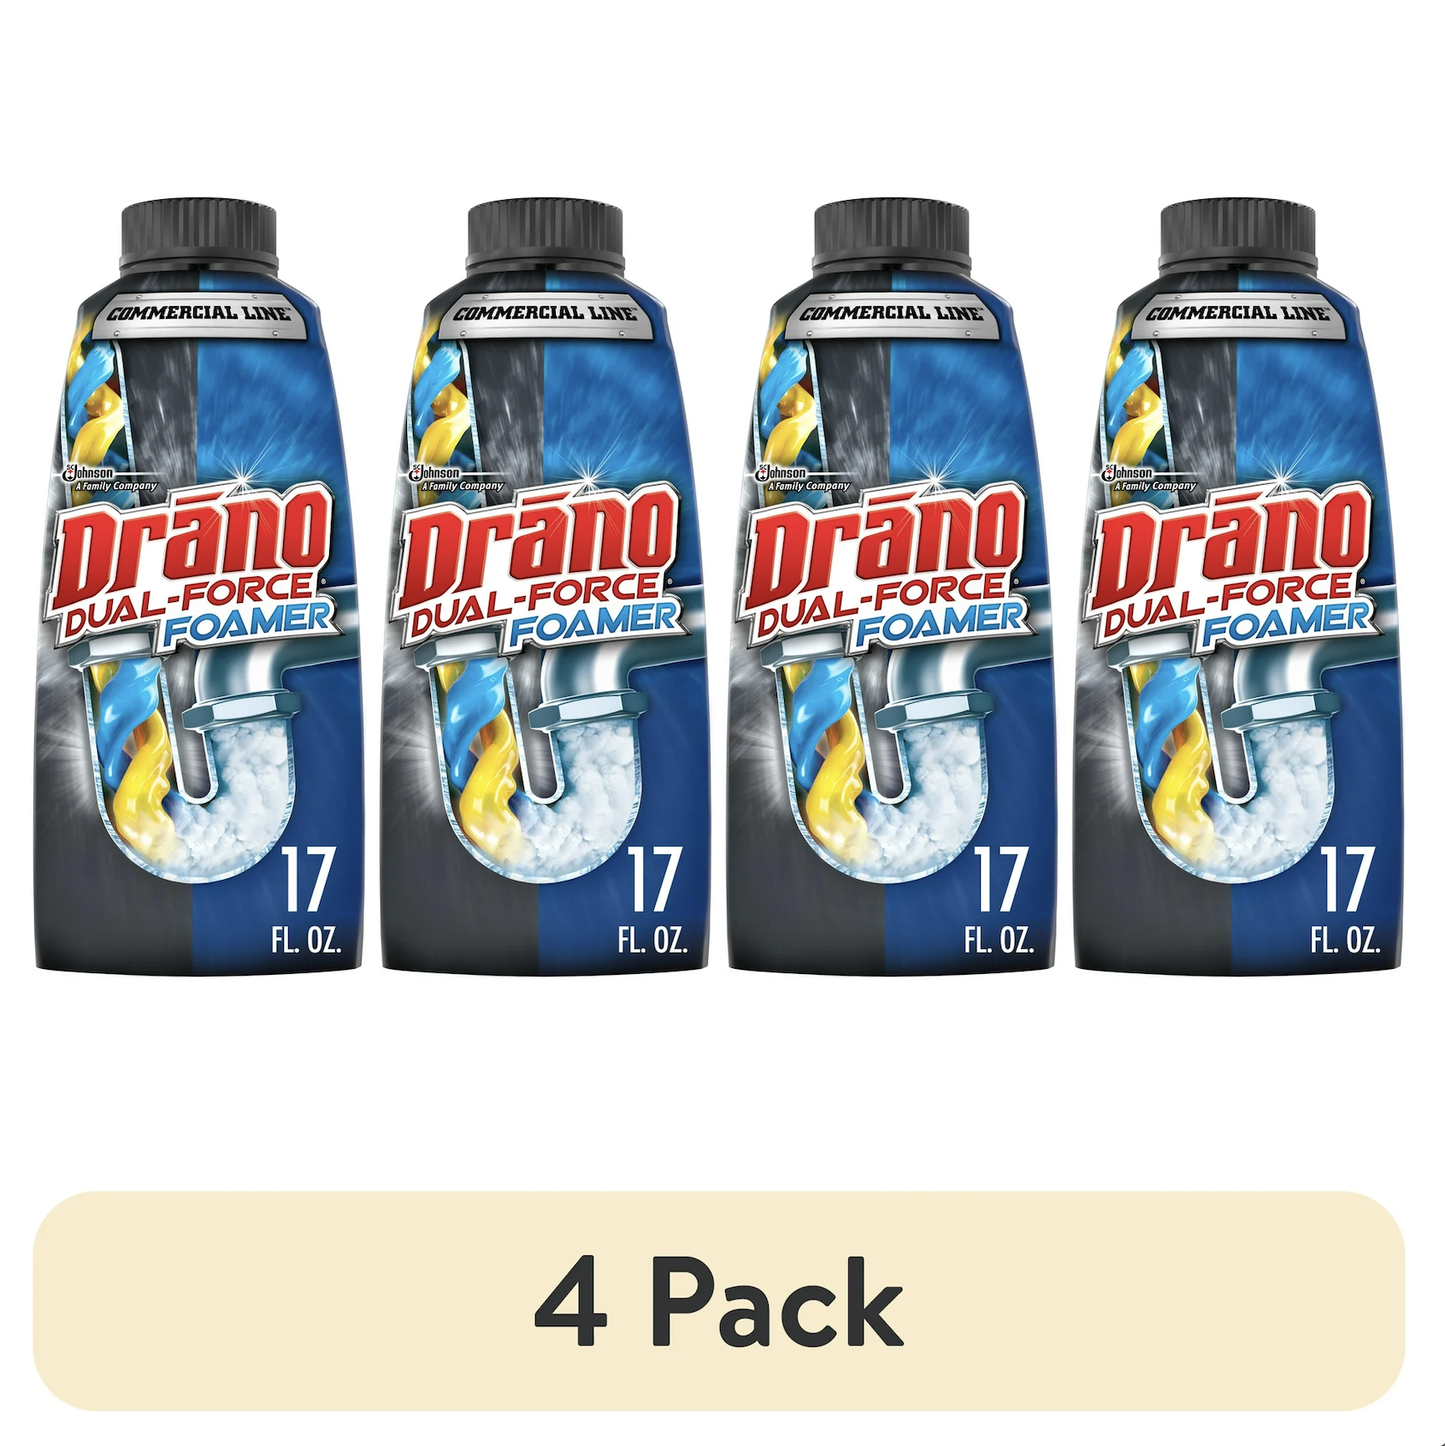 Drano Dual-Force Foamer, Drain Clog Remover, Commercial Line, 17 oz (4 Pack)